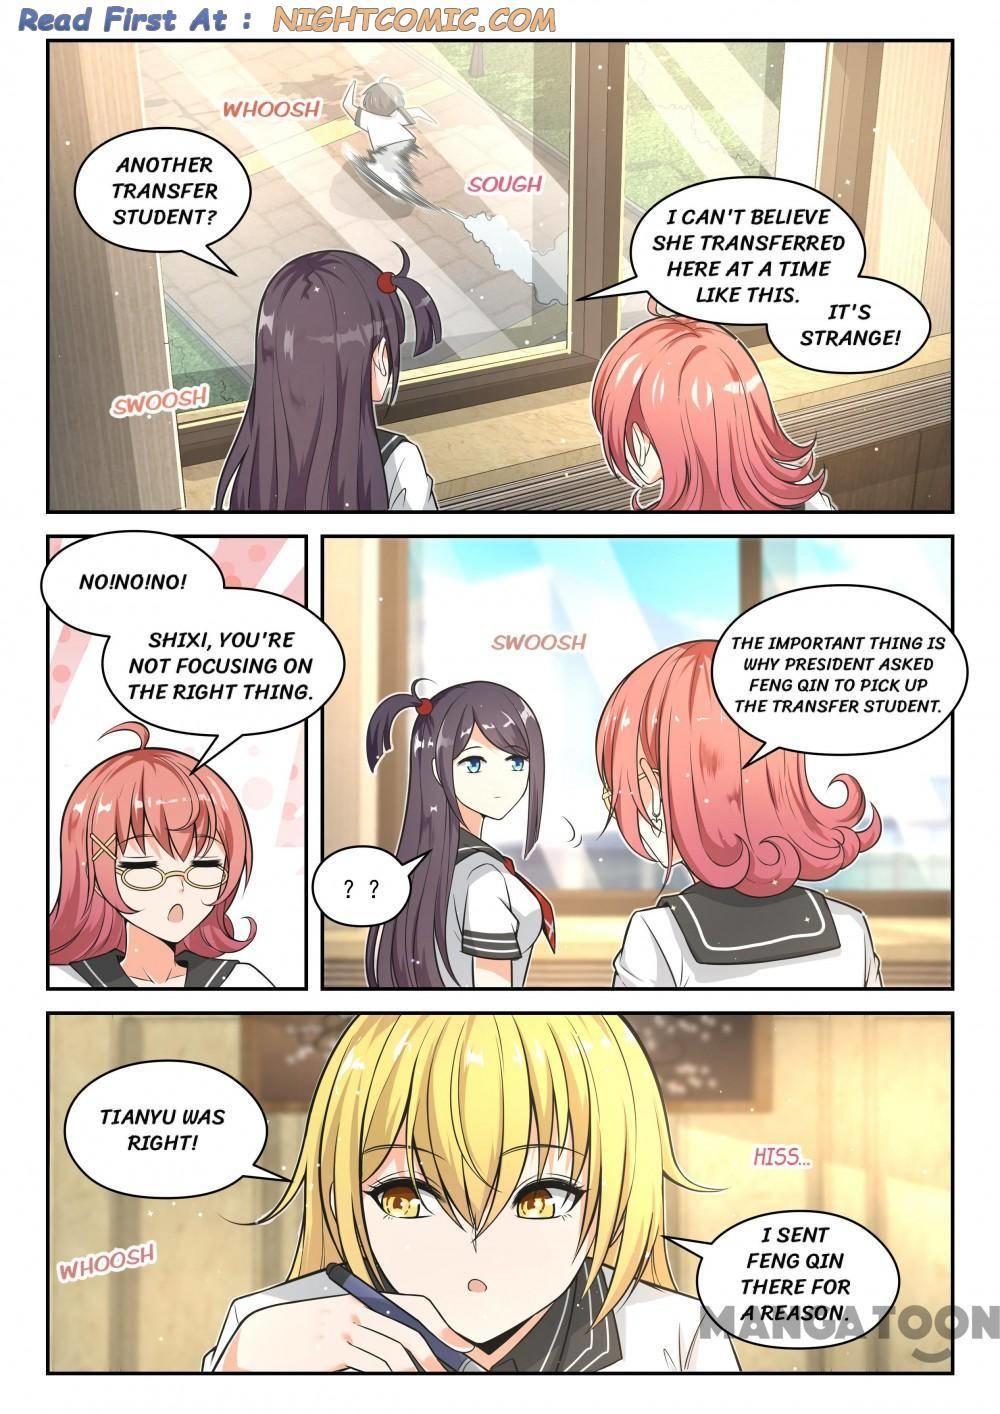 The Boy In The All-Girls School Chapter 473 page 2 - Mangakakalot